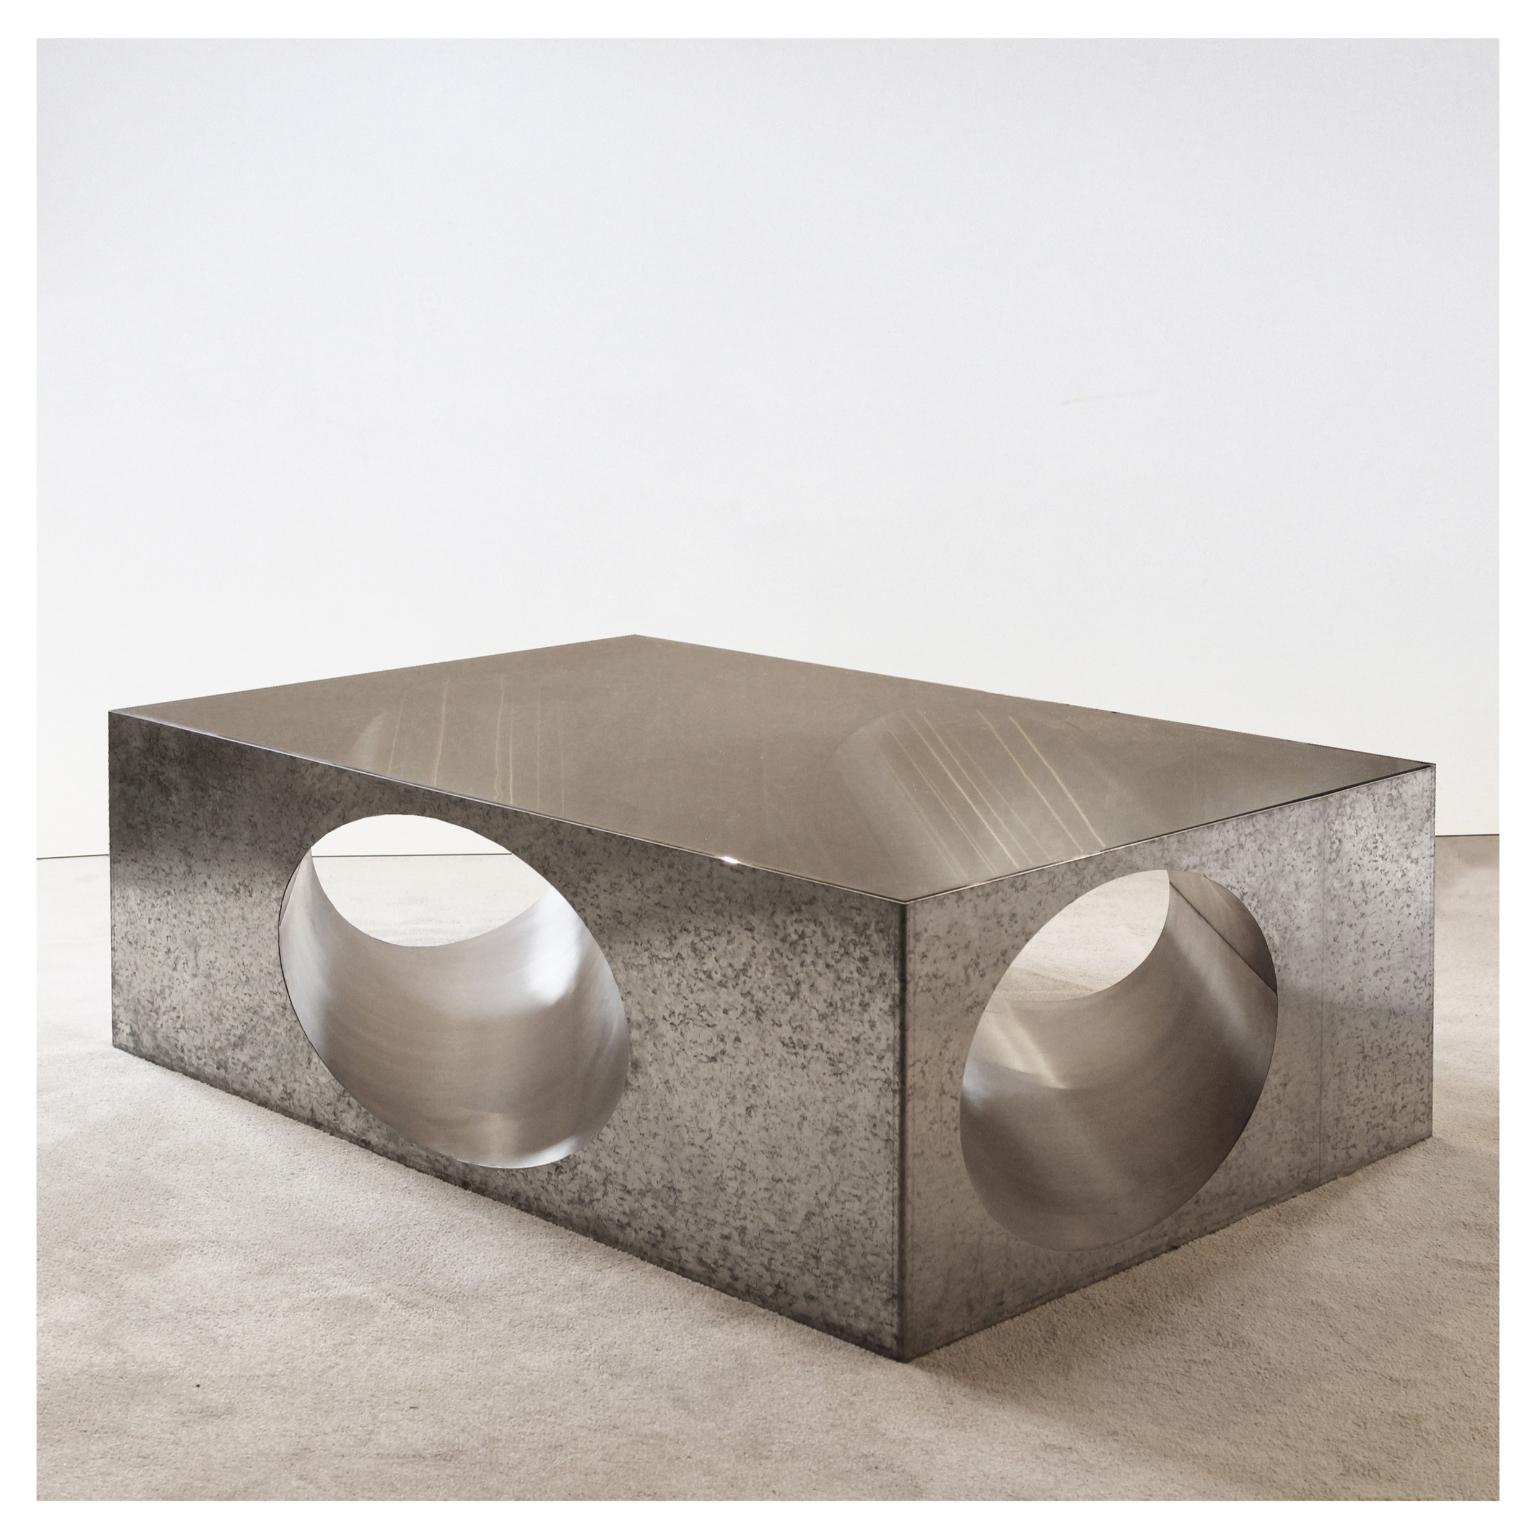 Hol-low table by Christian Zahr
Dimensions: W 120 x D 80 x H 40 cm
Materials: Galvanised steel- stainless steel- tainted glass

Each piece is handmade.

Christian Zahr studied architecture at the Academie Libanaise des Beaux Arts, Beirut,